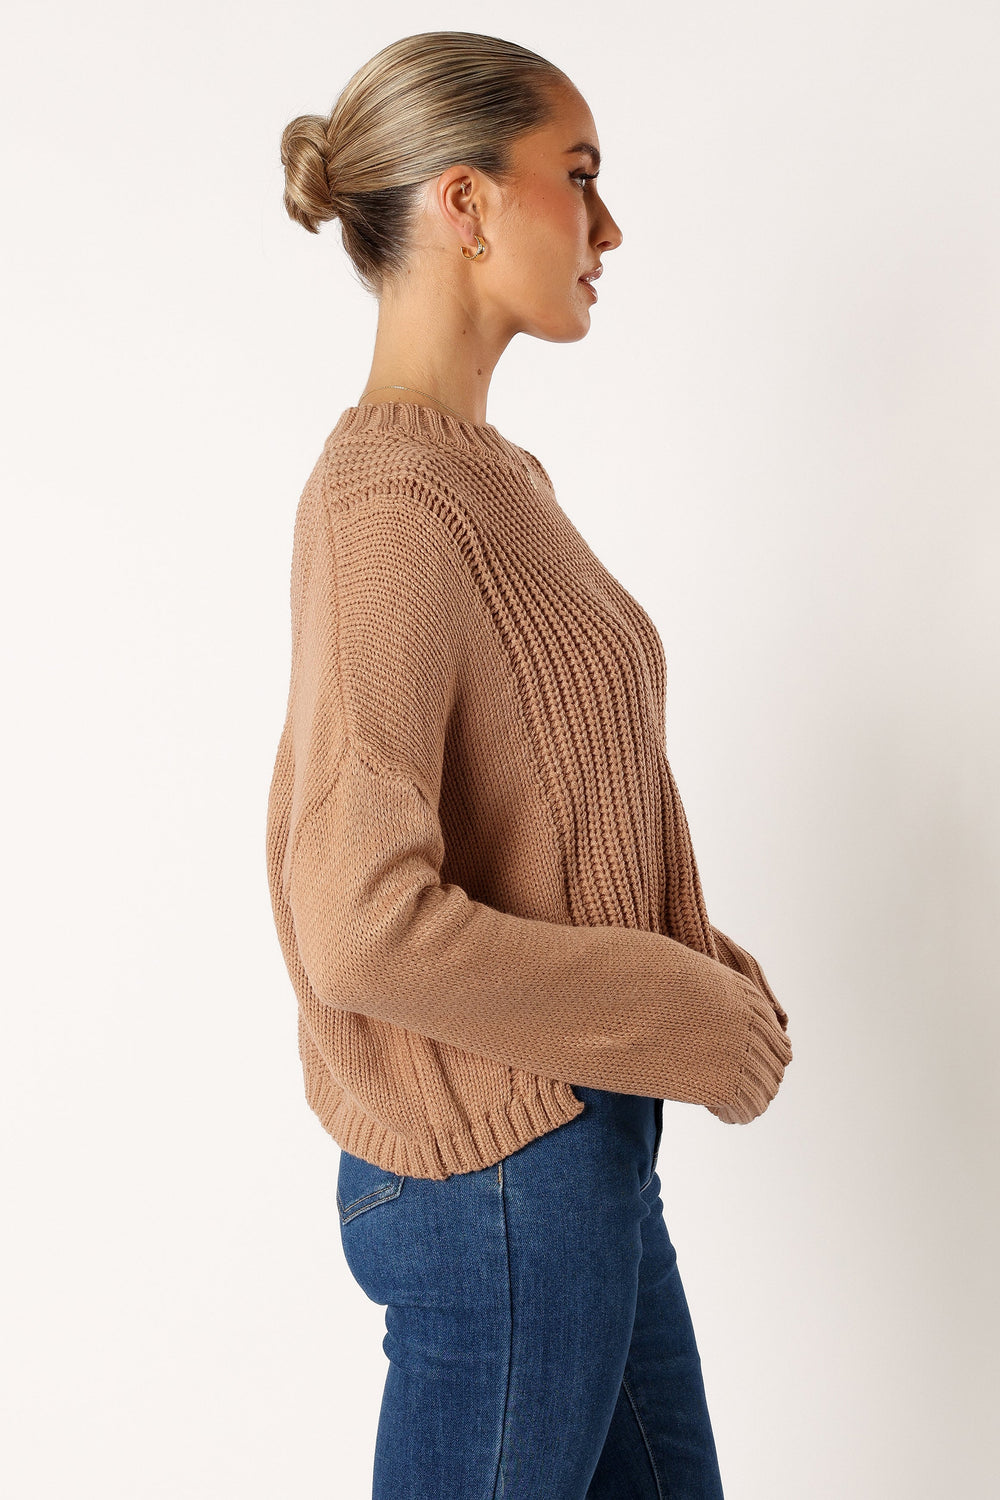 Petal and Pup USA KNITWEAR Arlette Textured Knit Sweater - Stone